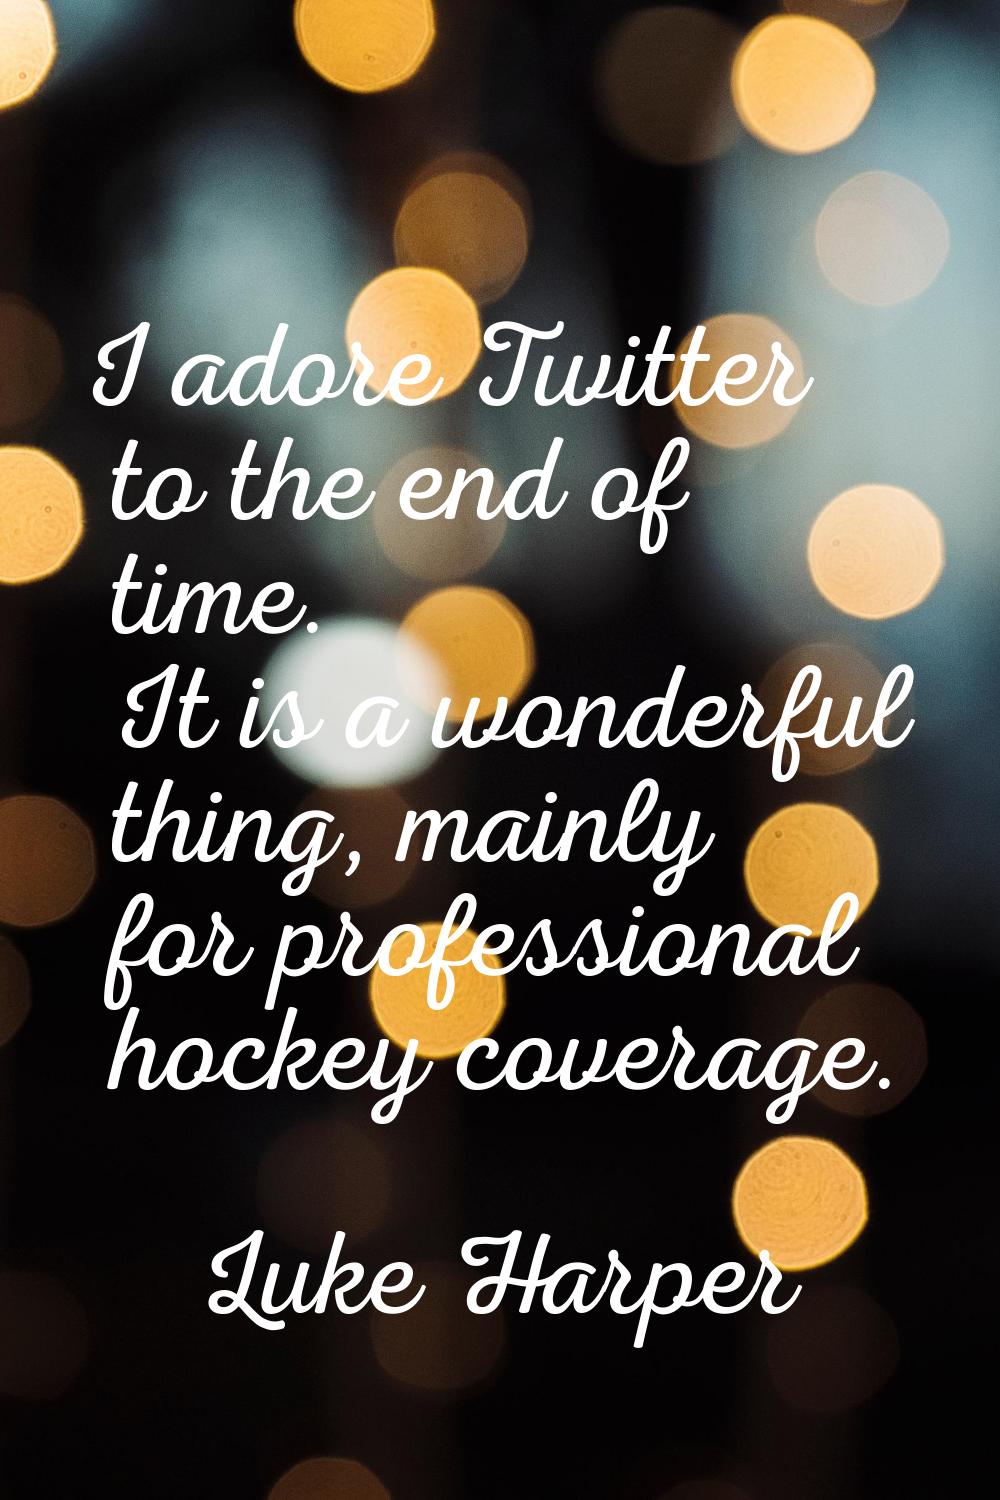 I adore Twitter to the end of time. It is a wonderful thing, mainly for professional hockey coverag